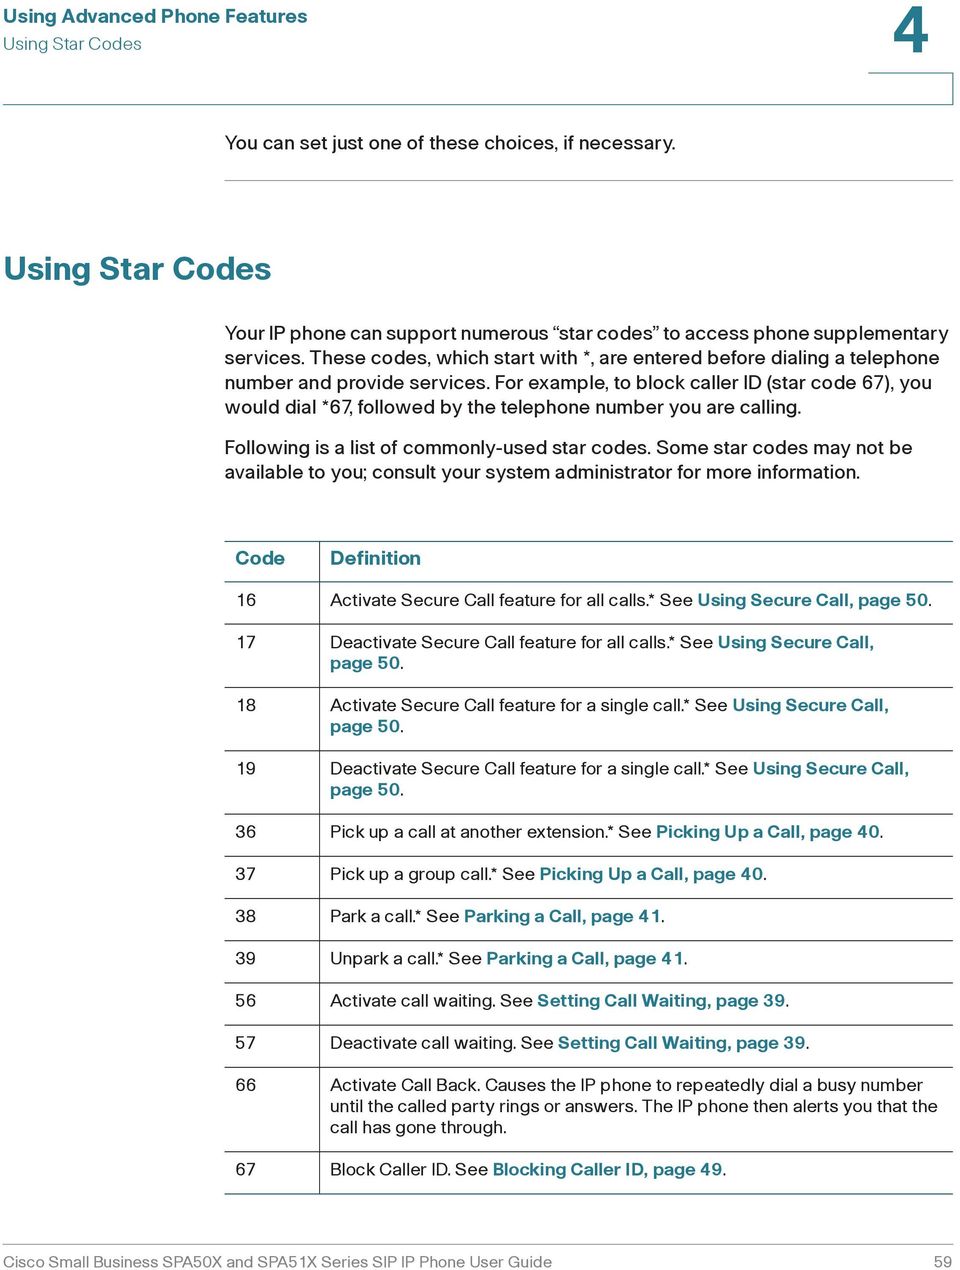 For example, to block caller ID (star code 67), you would dial *67, followed by the telephone number you are calling. Following is a list of commonly-used star codes.